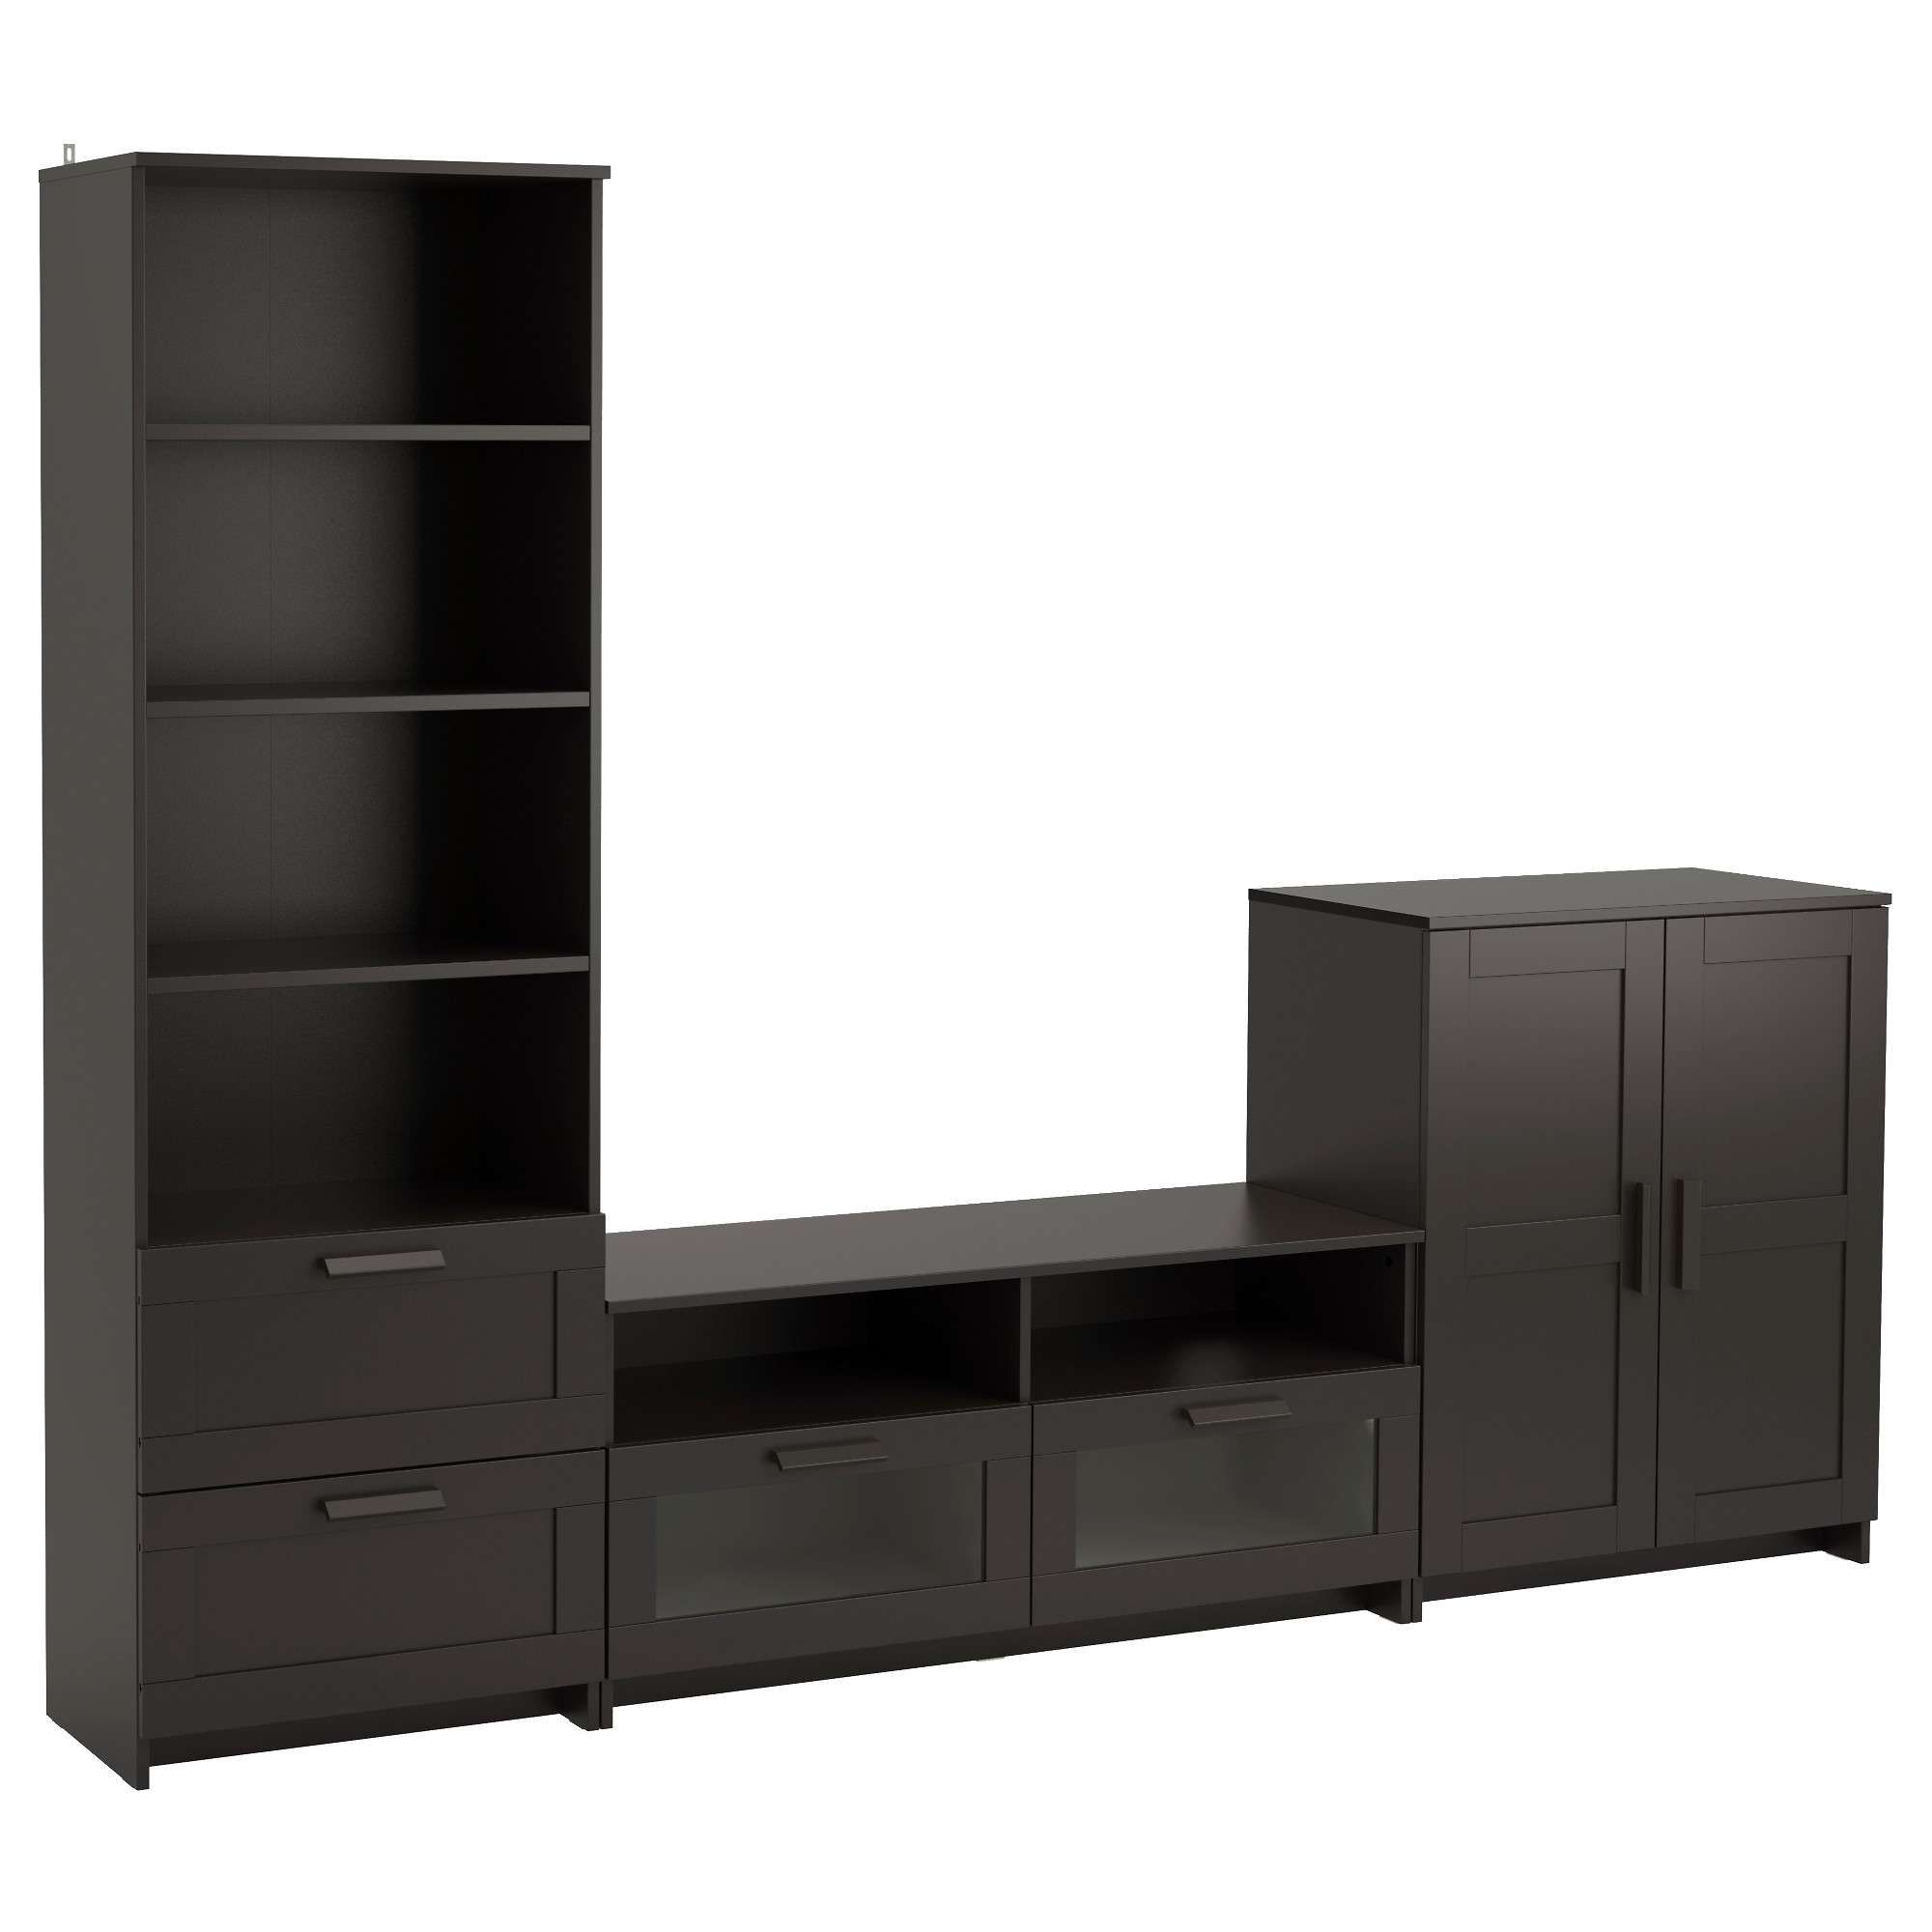 Tv Stands & Entertainment Centers – Ikea Throughout Tv Stands Bookshelf Combo (Gallery 3 of 15)